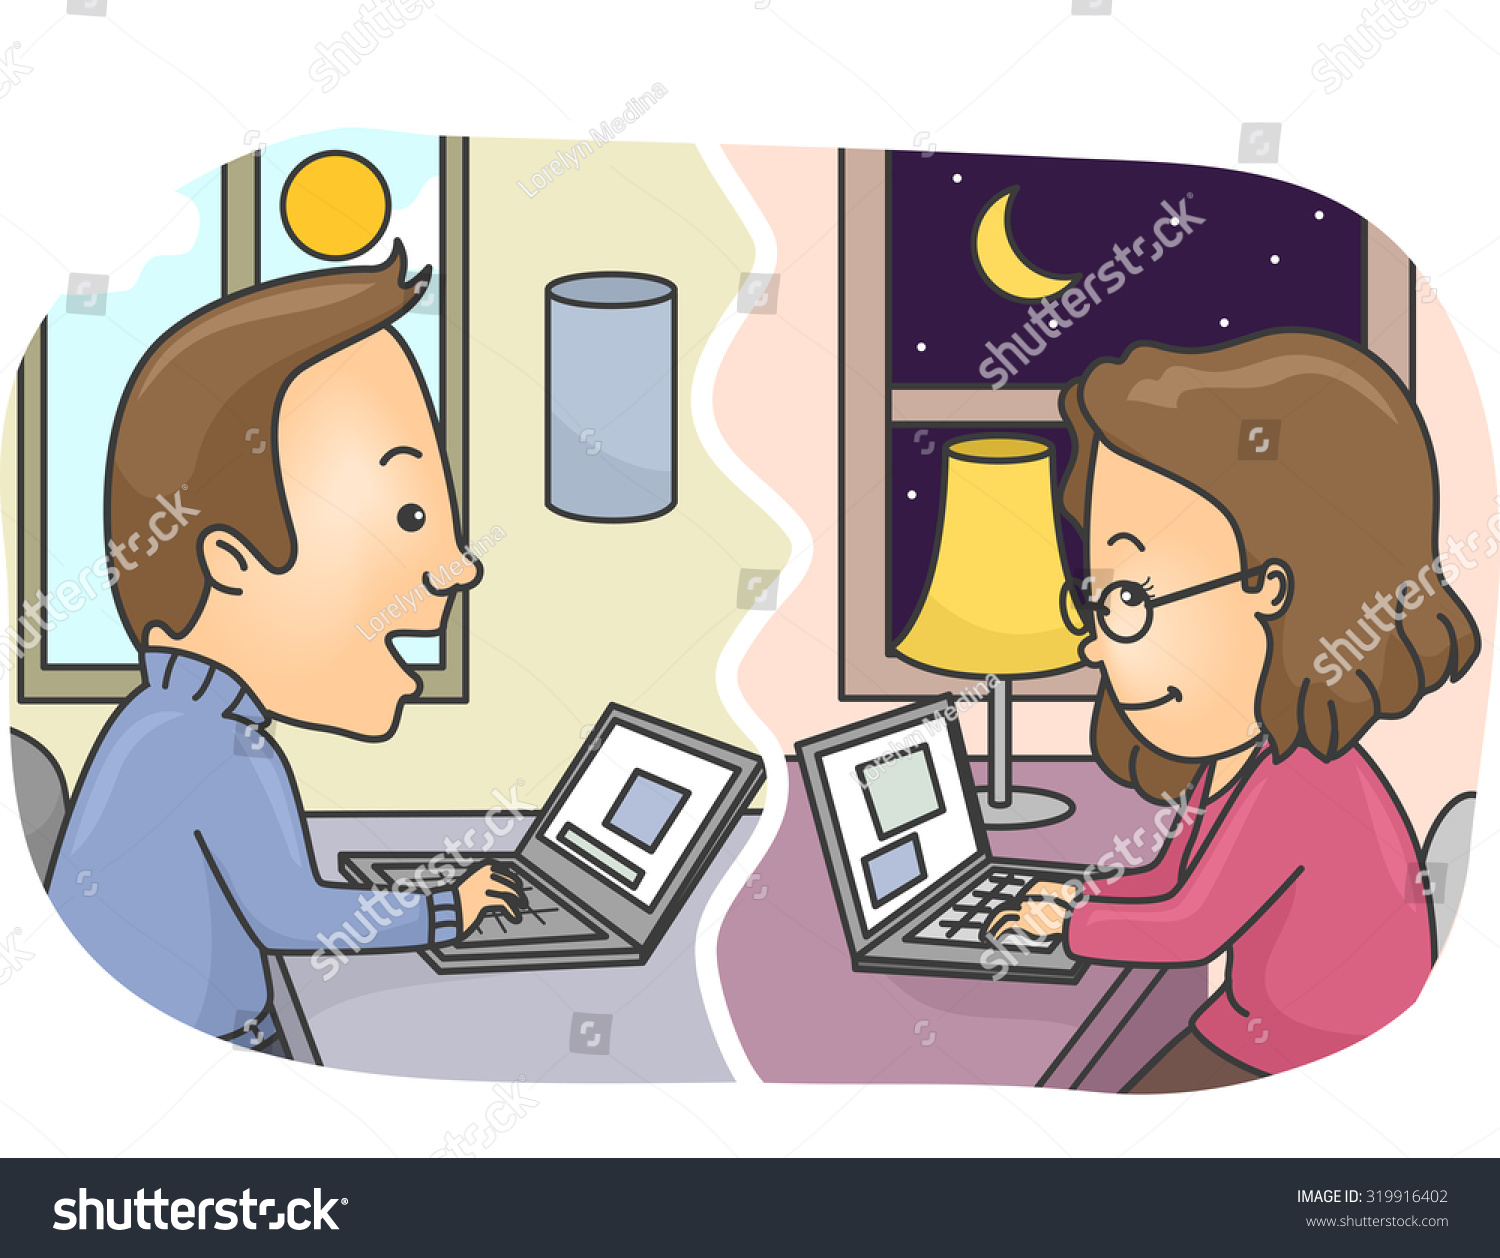 Illustration Couple Long Distance Relationship Chatting Stock Vector Royalty Free 319916402 3917